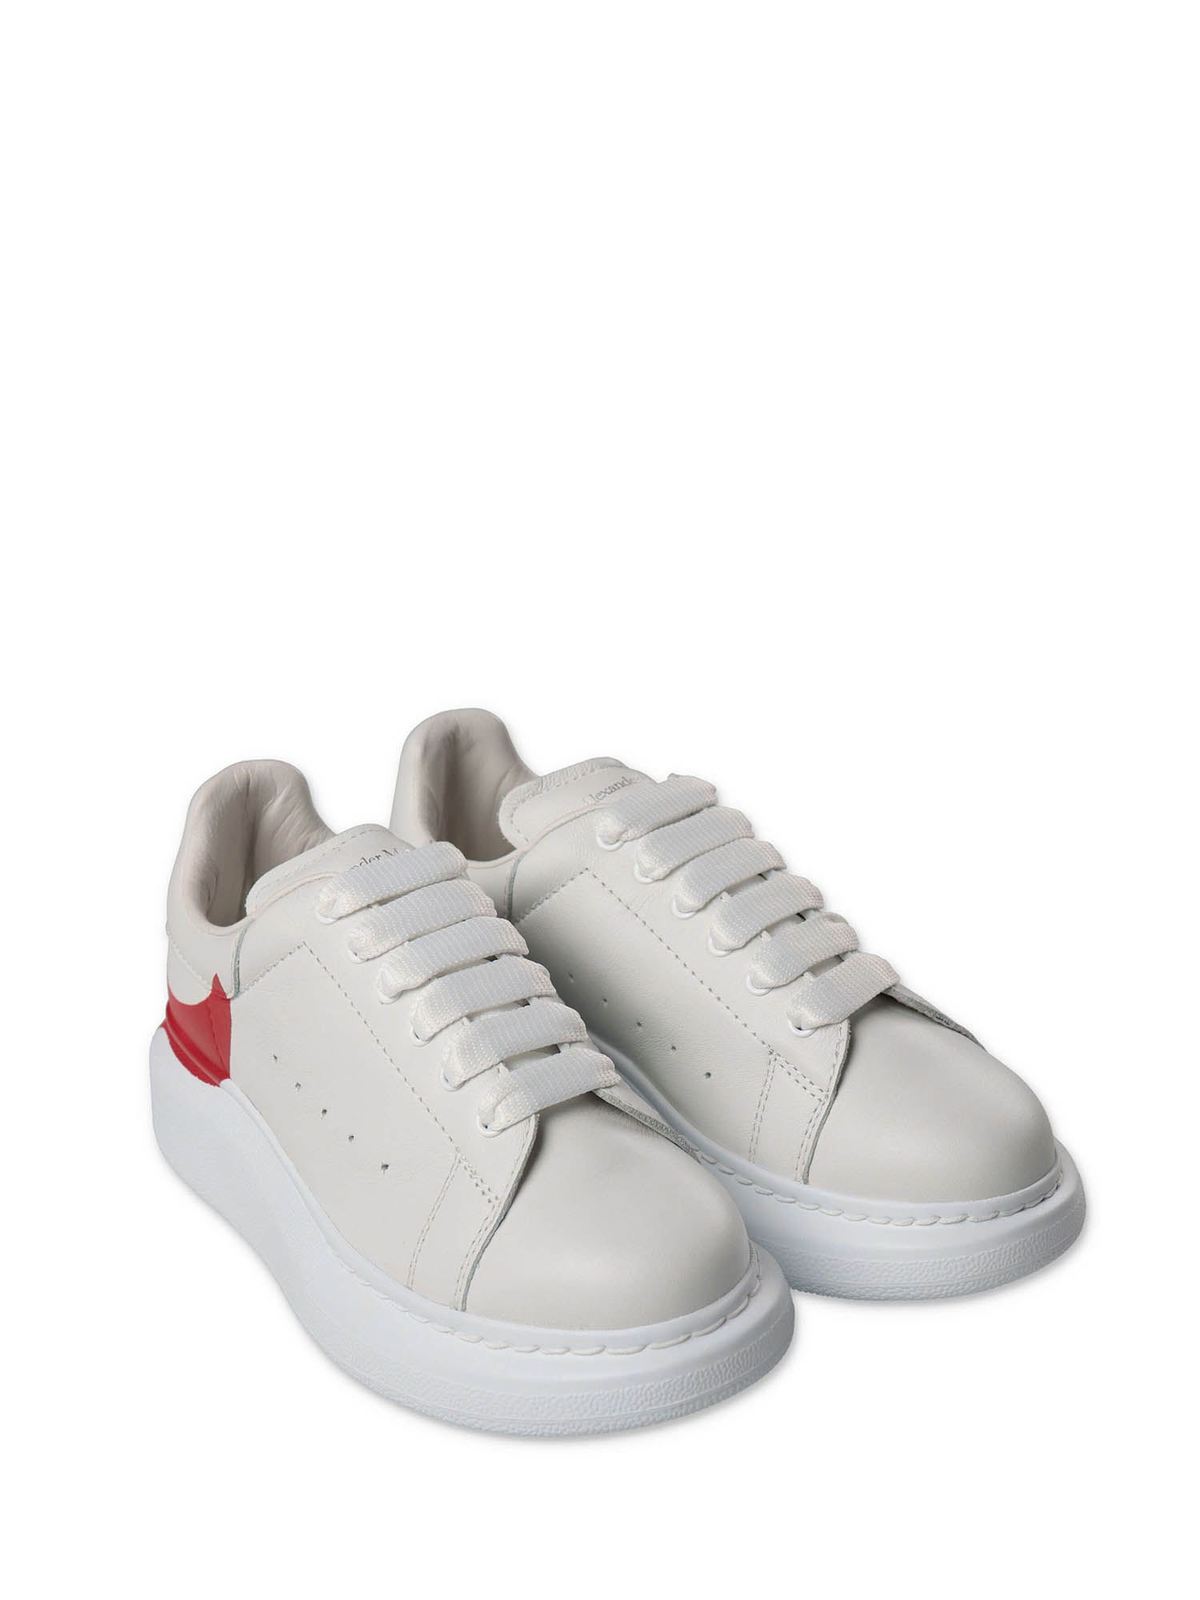 Alexander Mcqueen Kids' Oversize White And Red Sneakers